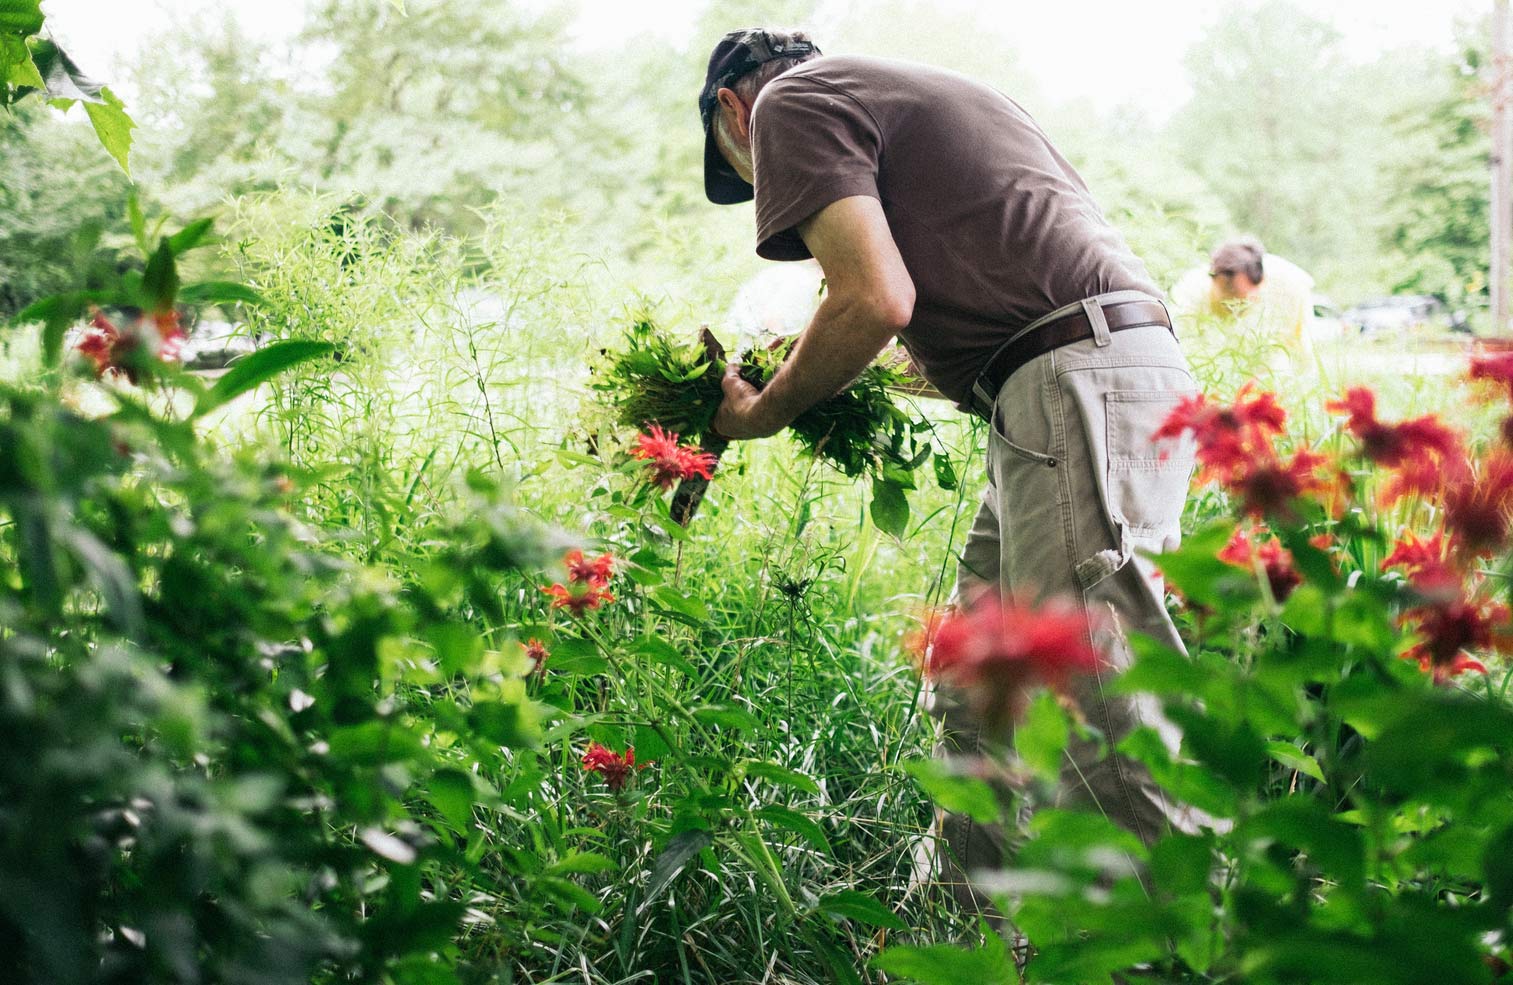 A man pulling weeds in a field of red flowers.